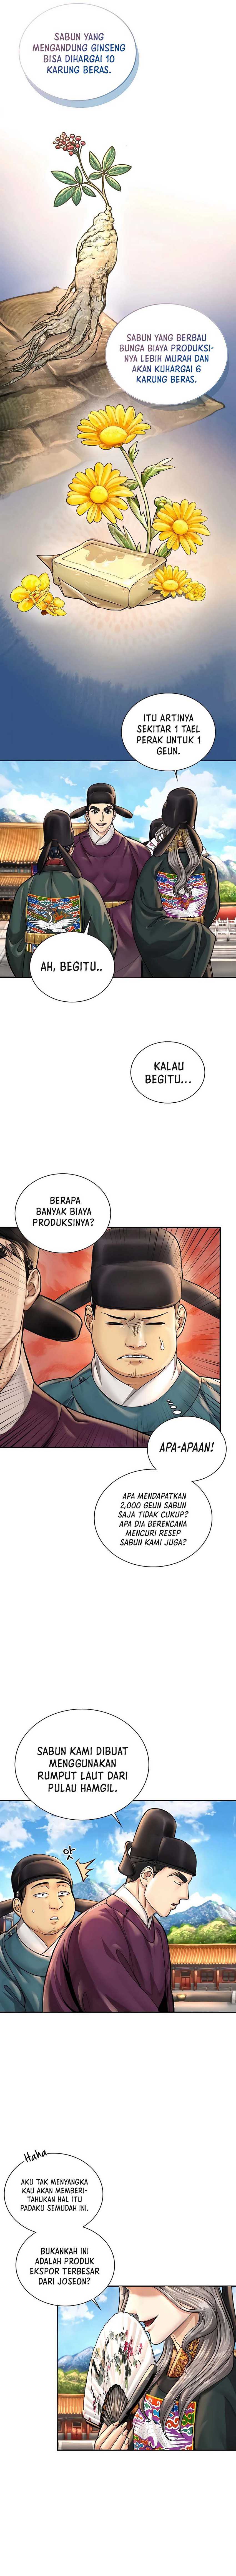 Muscle Joseon Chapter 22